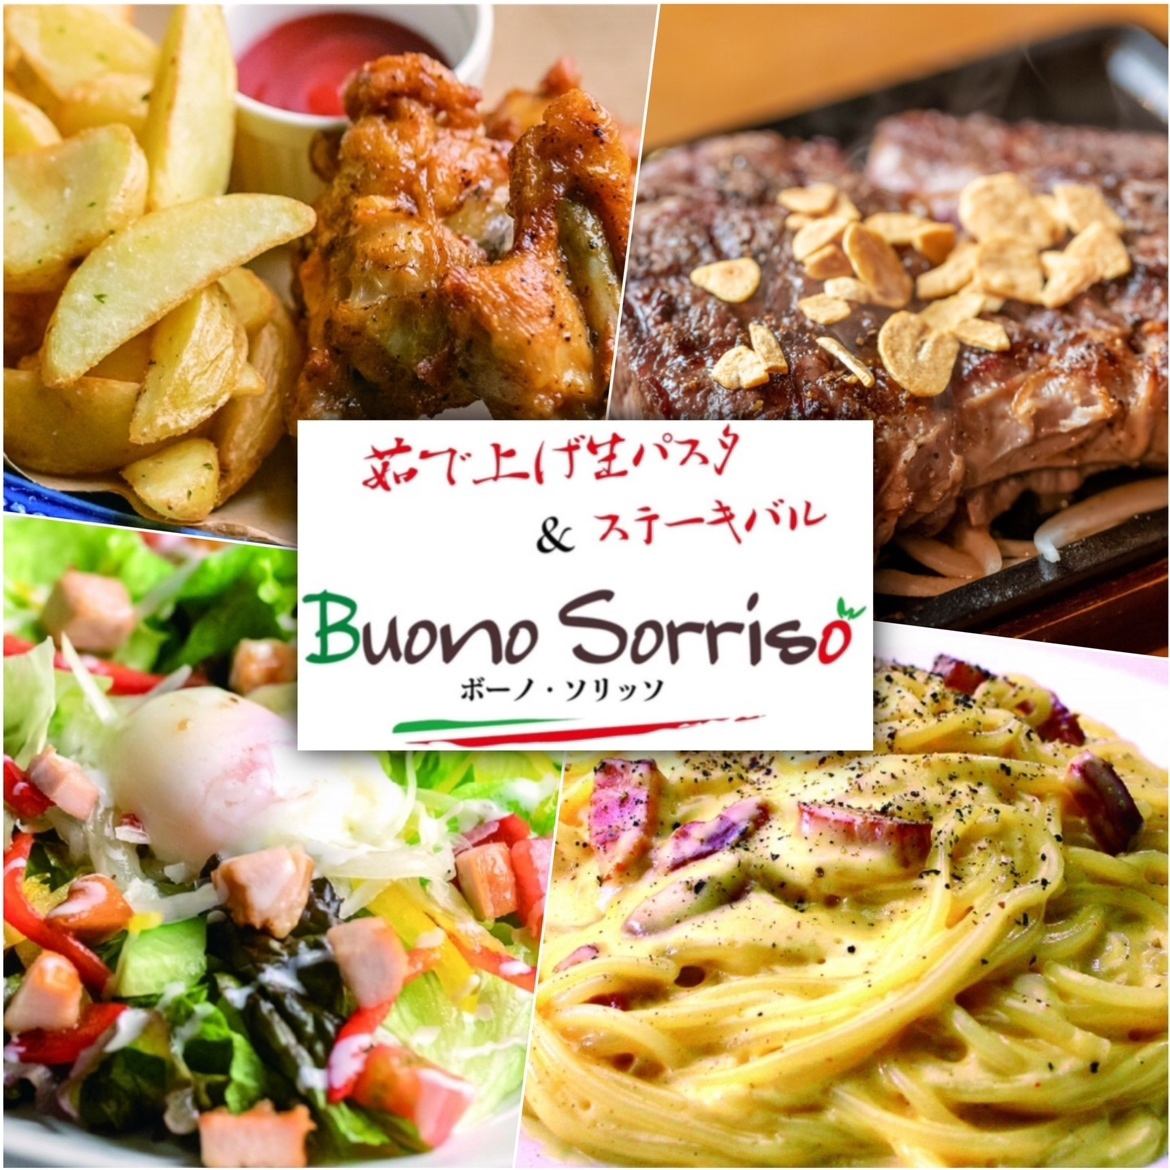 Tsuruga's authentic Italian bar ♪ Boiled raw pasta and steak bar shop opens in front of Tsuruga station ♪